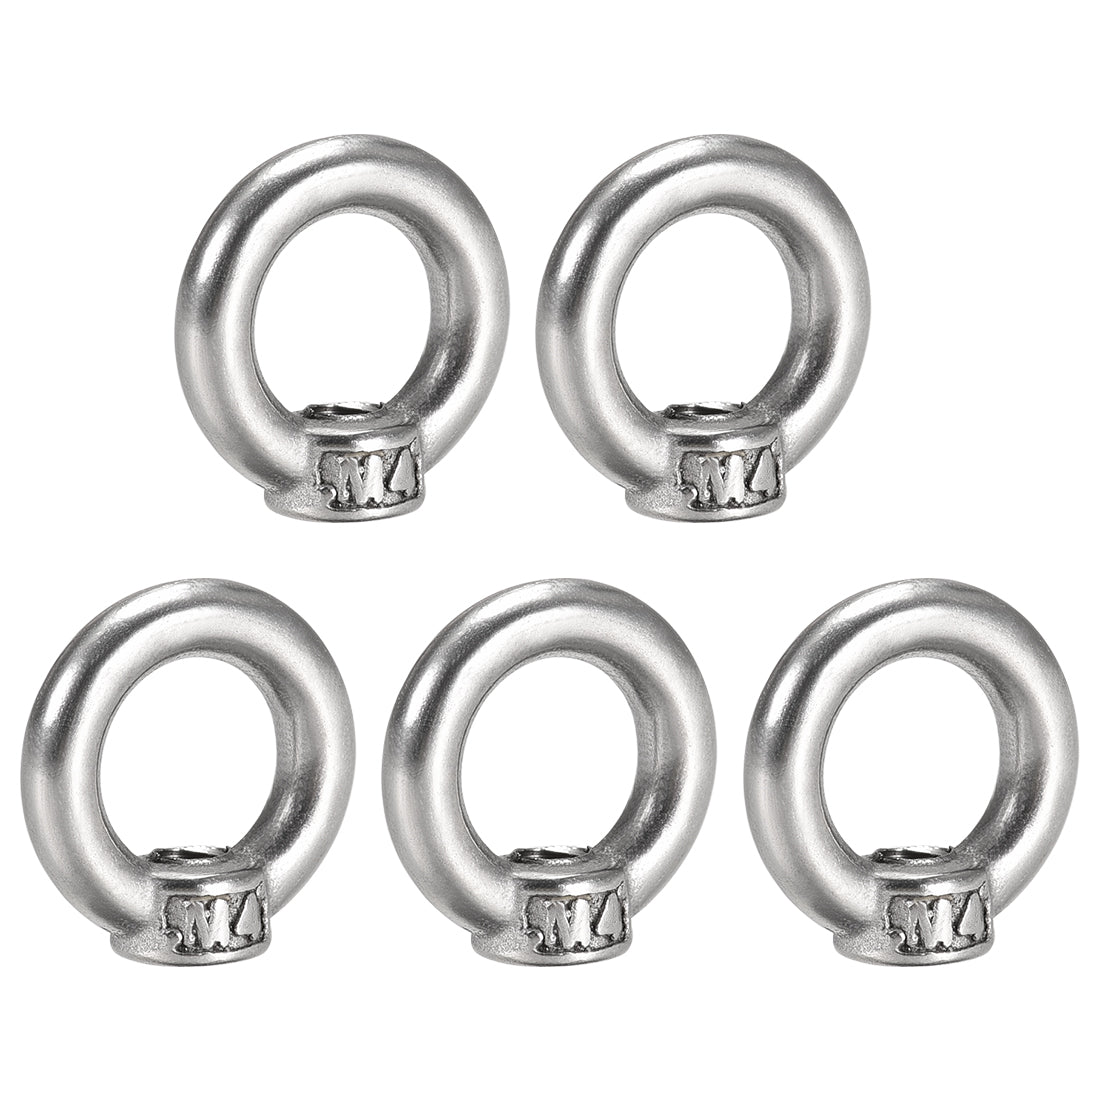 uxcell Uxcell M4 Thread Dia 304 Stainless Steel Ring Shape Eyed Bolt Lifting Eye Nut 5PCS